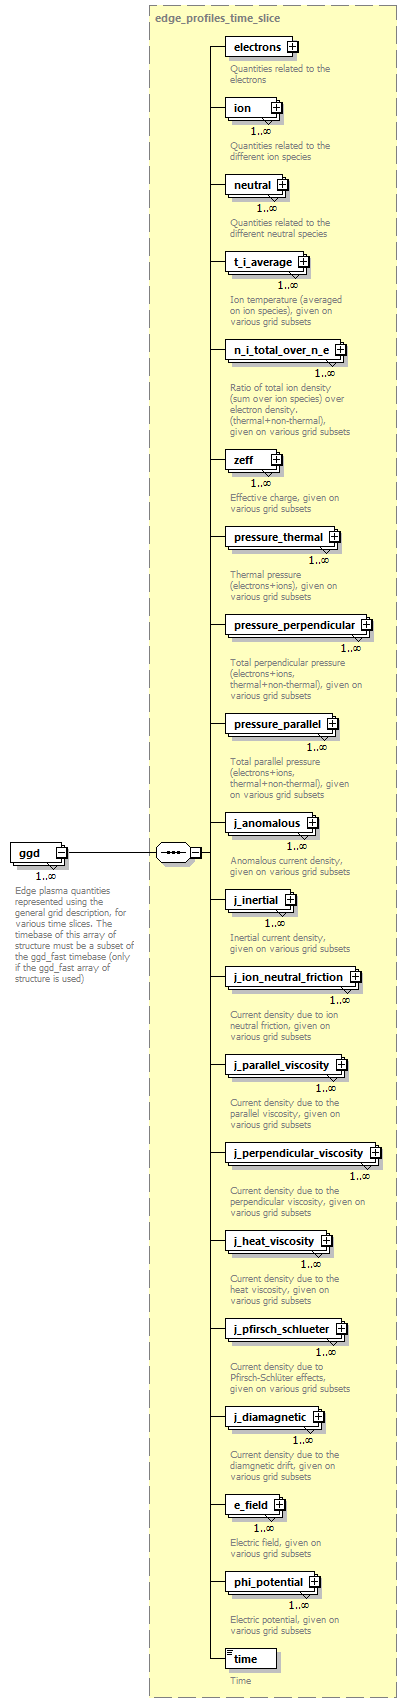 dd_data_dictionary.xml_p1529.png